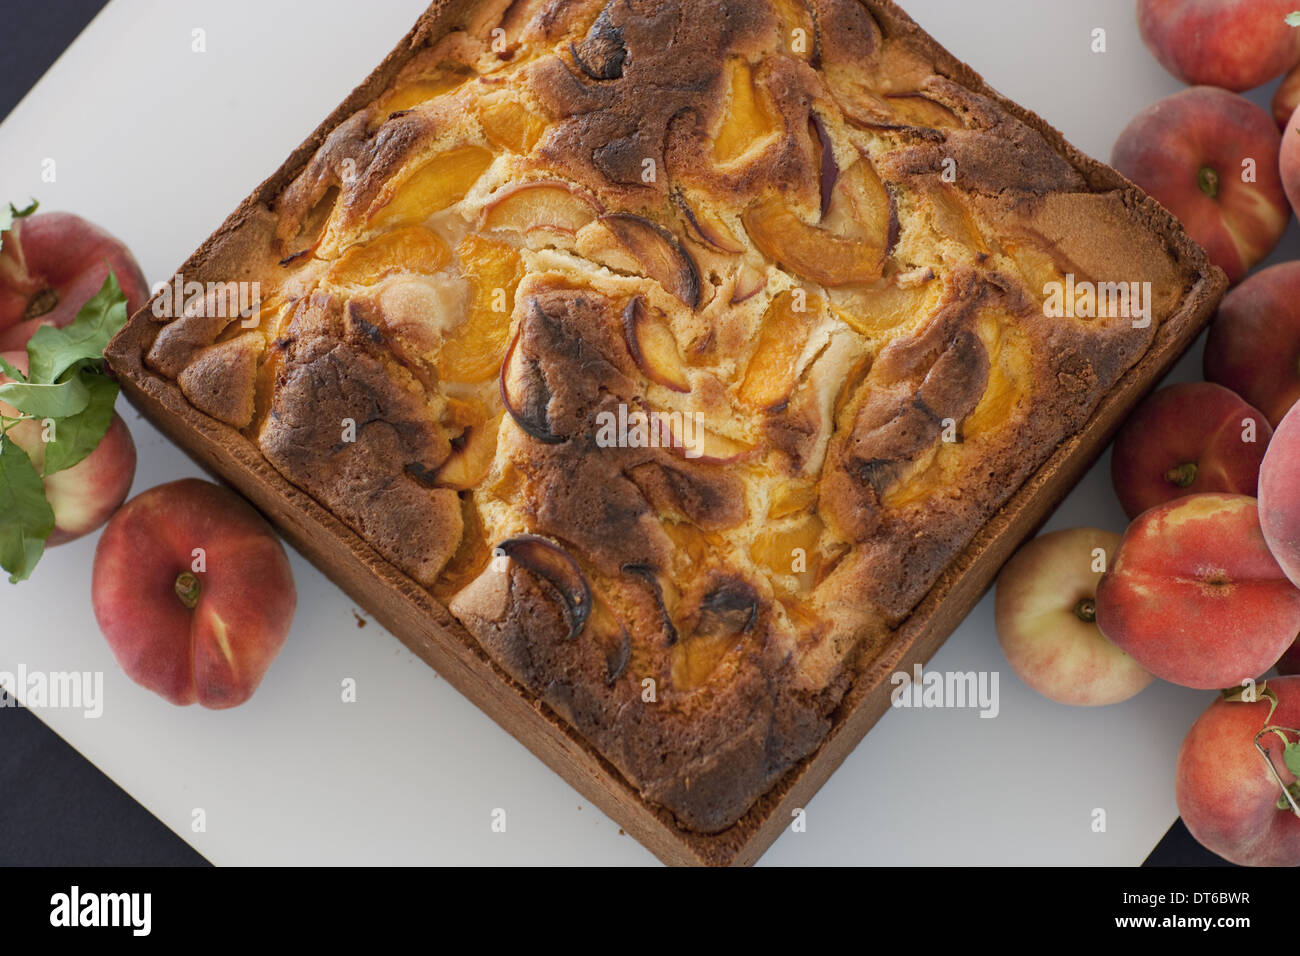 A square baked peach cake on a board with fresh peaches. Fruits. Organic fresh food on a farm stand. Stock Photo